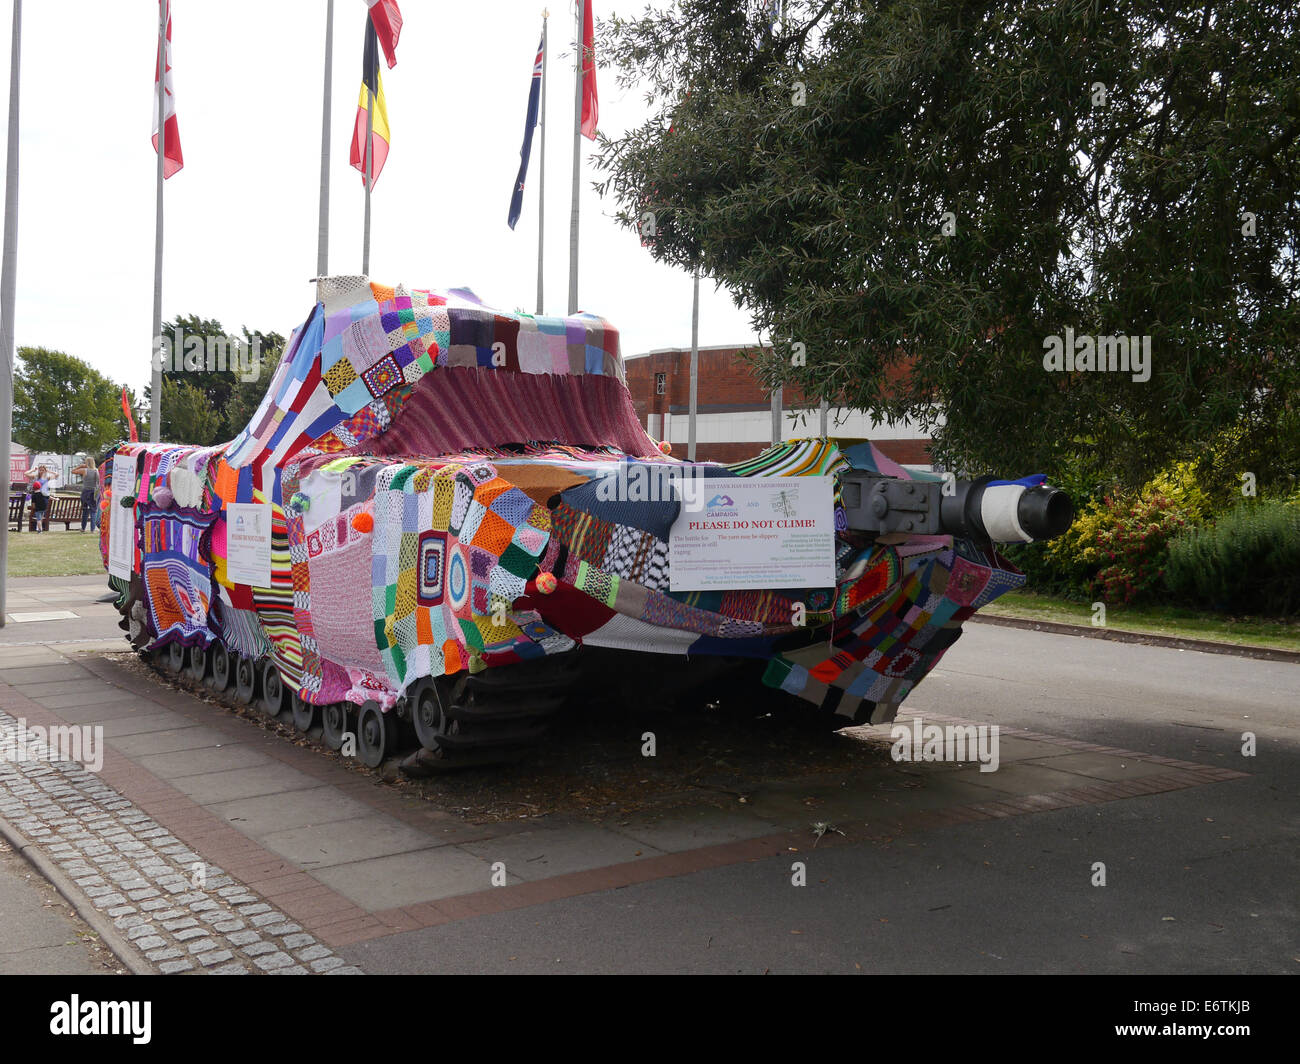 A yarn bombed second world war tank outside Portsmouth D-day museum in Portsmouth, England Stock Photo